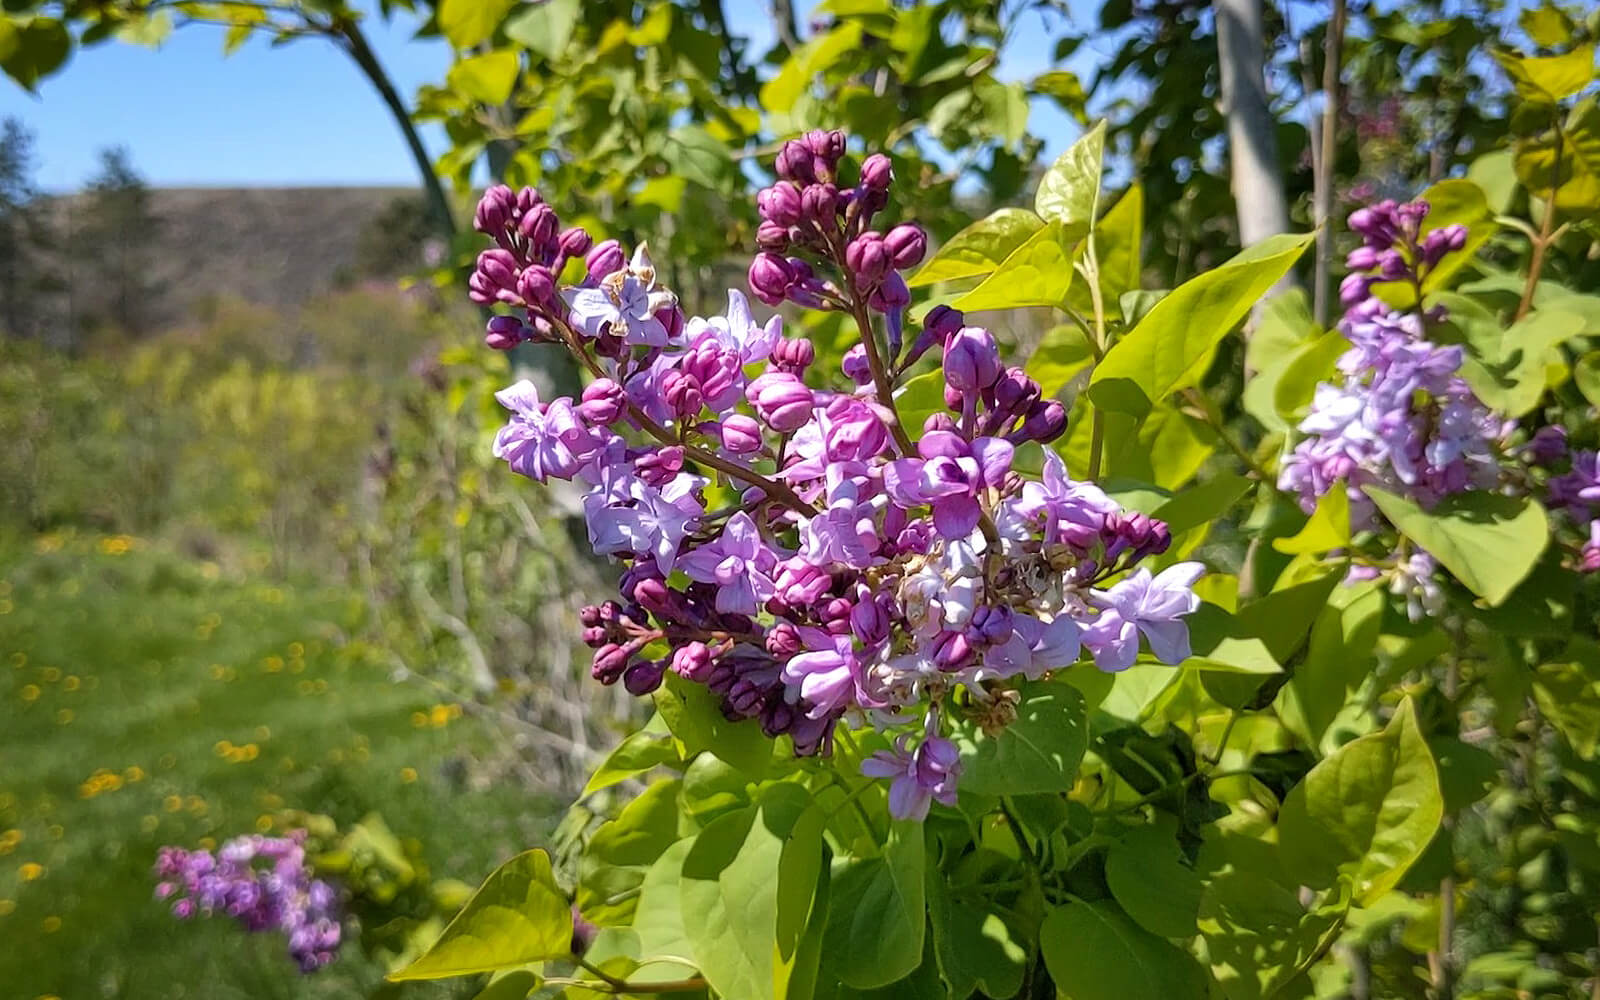 Close Up of the Lilacs at the Centennial Lilac Garden, One of the Free Things to Do in Niagara Falls :: I've Been Bit! Travel Blog